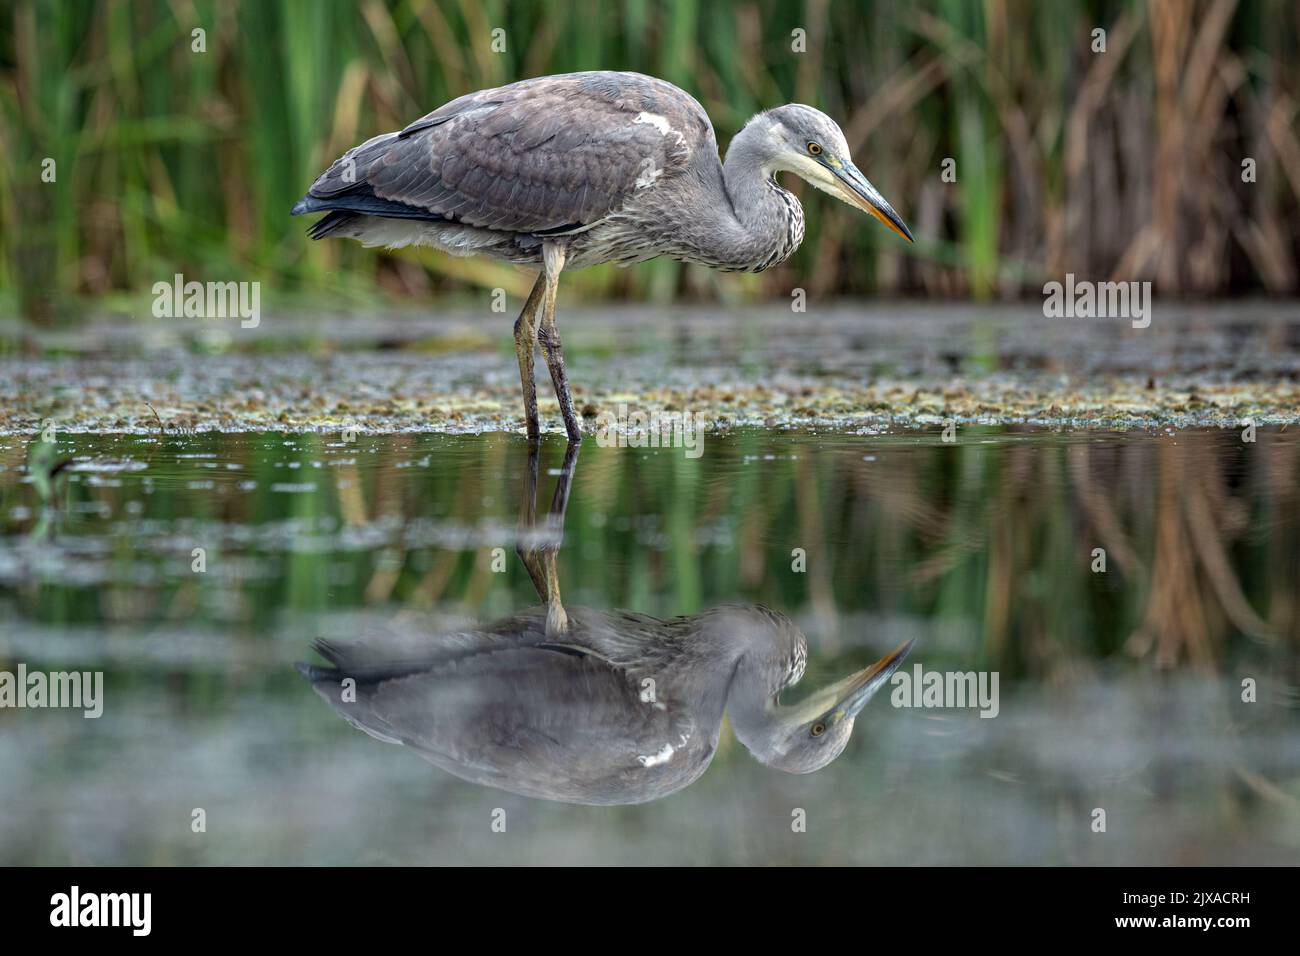 Reflected in the still water, a grey heron, Ardea cinerea, is captured while it is fishing Stock Photo